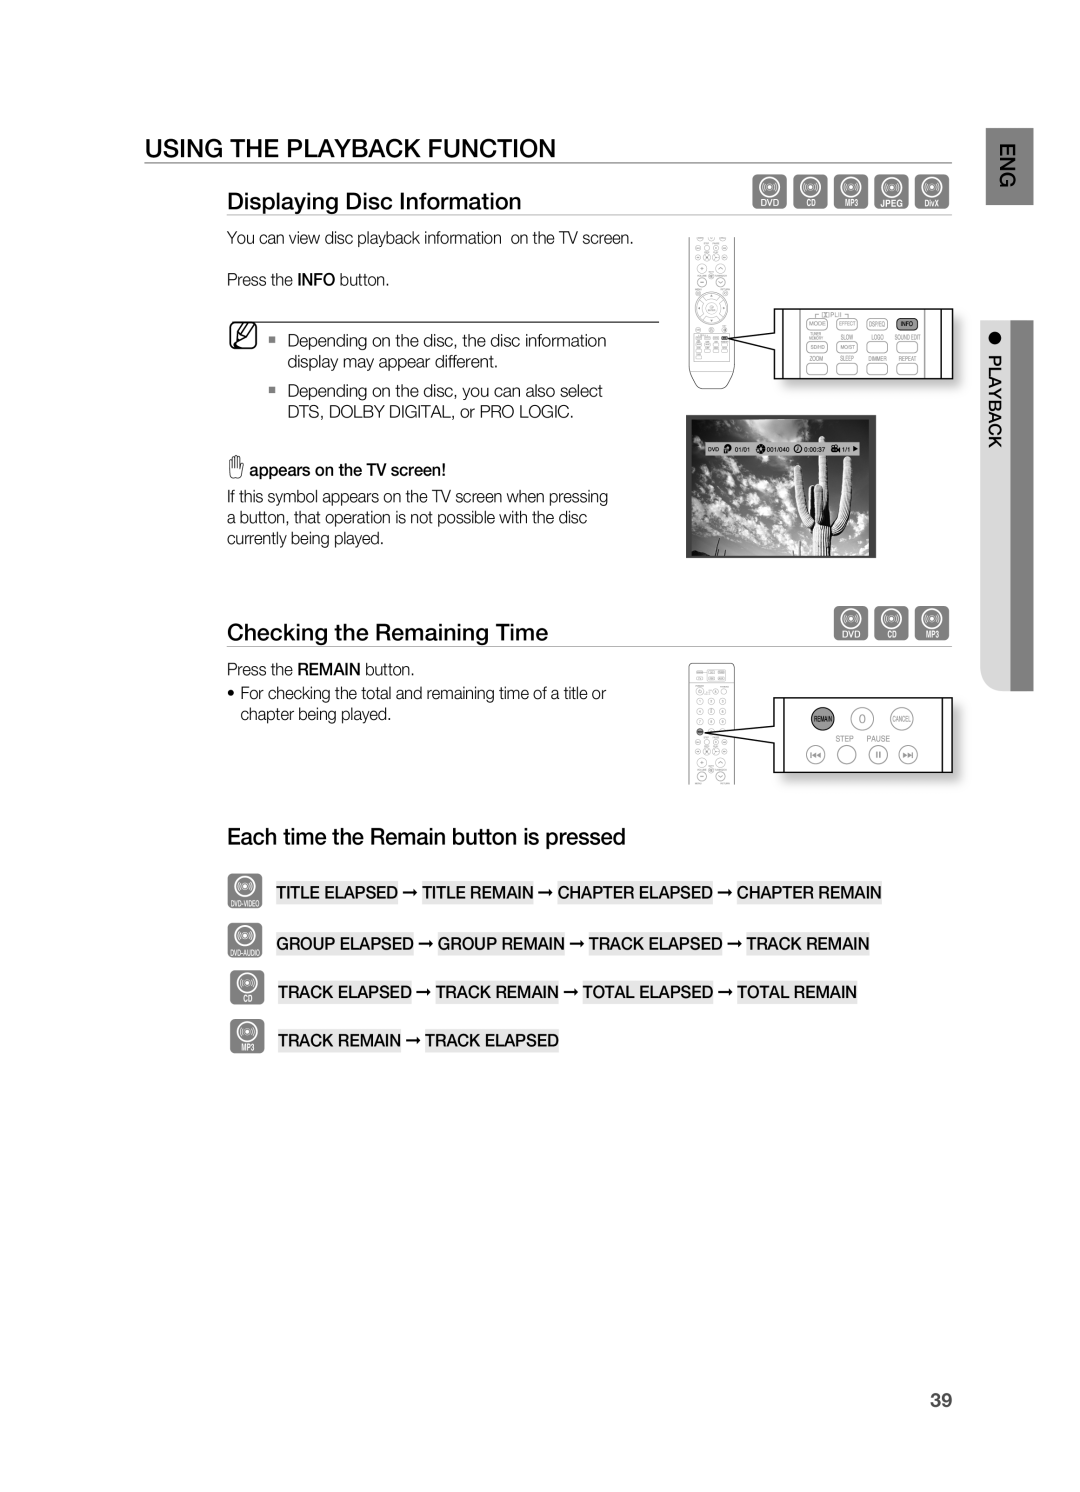 Samsung AH68-02055S manual dBAGD, USinG tHE PLayBaCK fUnCtiOn, Displaying Disc information, Checking the remaining time 